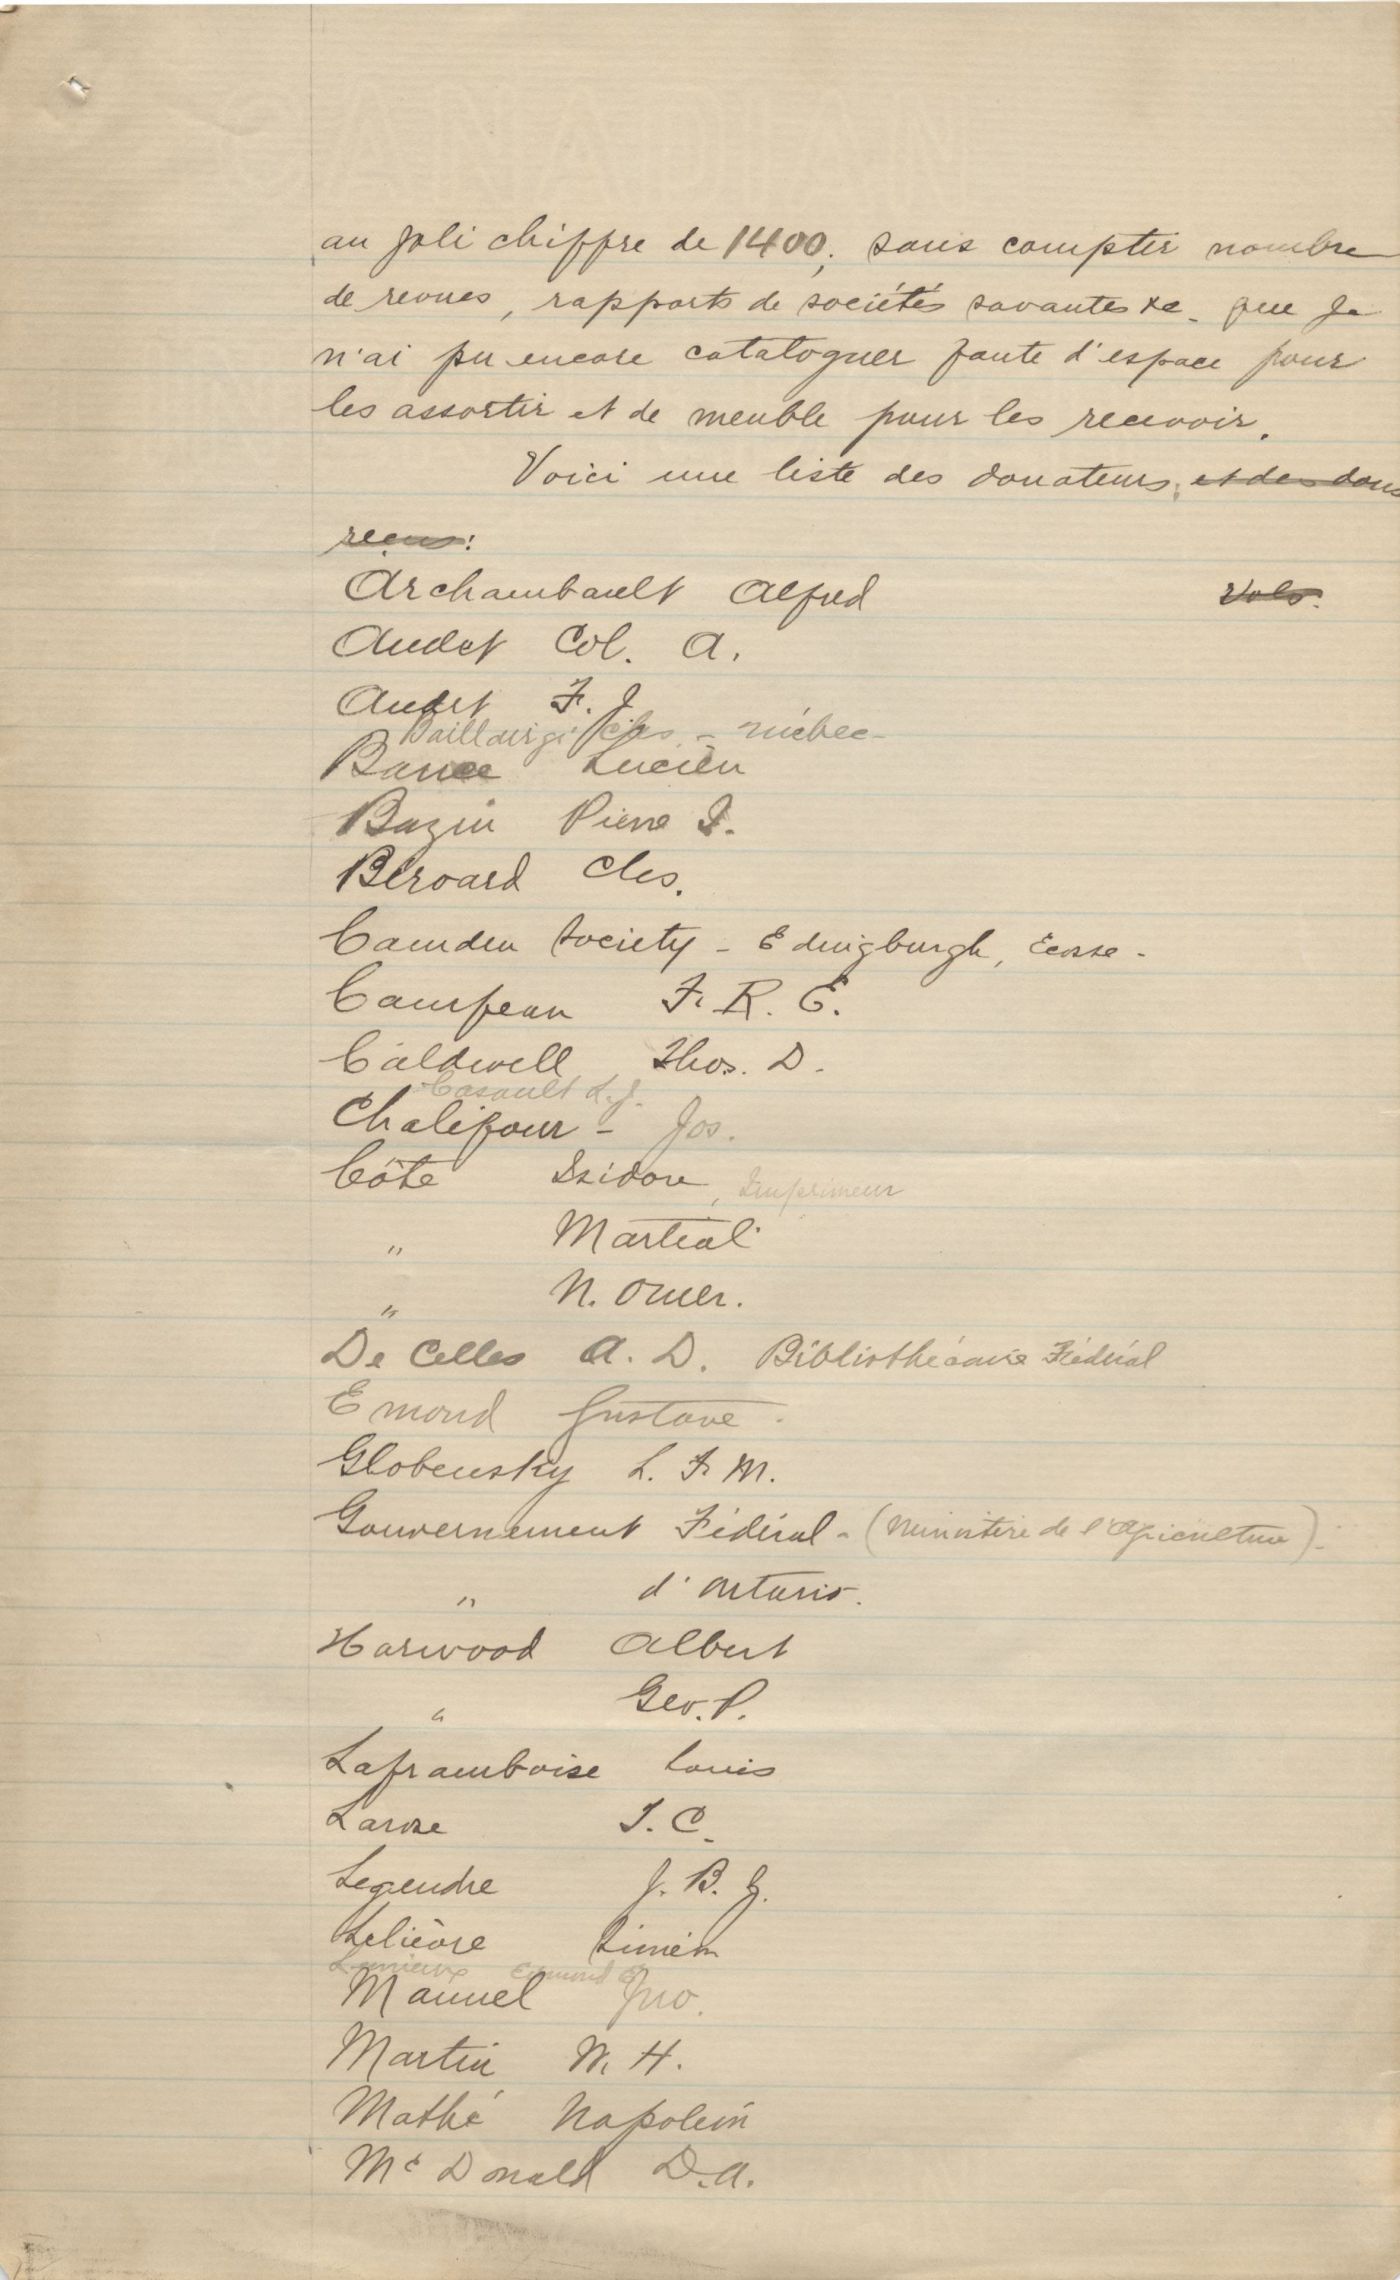 Report written by hand in French, with corrections and additions in pencil. It includes a list of donors and a list of newspapers and magazines that are part of the collection. It is signed by the librarian in Ottawa, in October 1897.